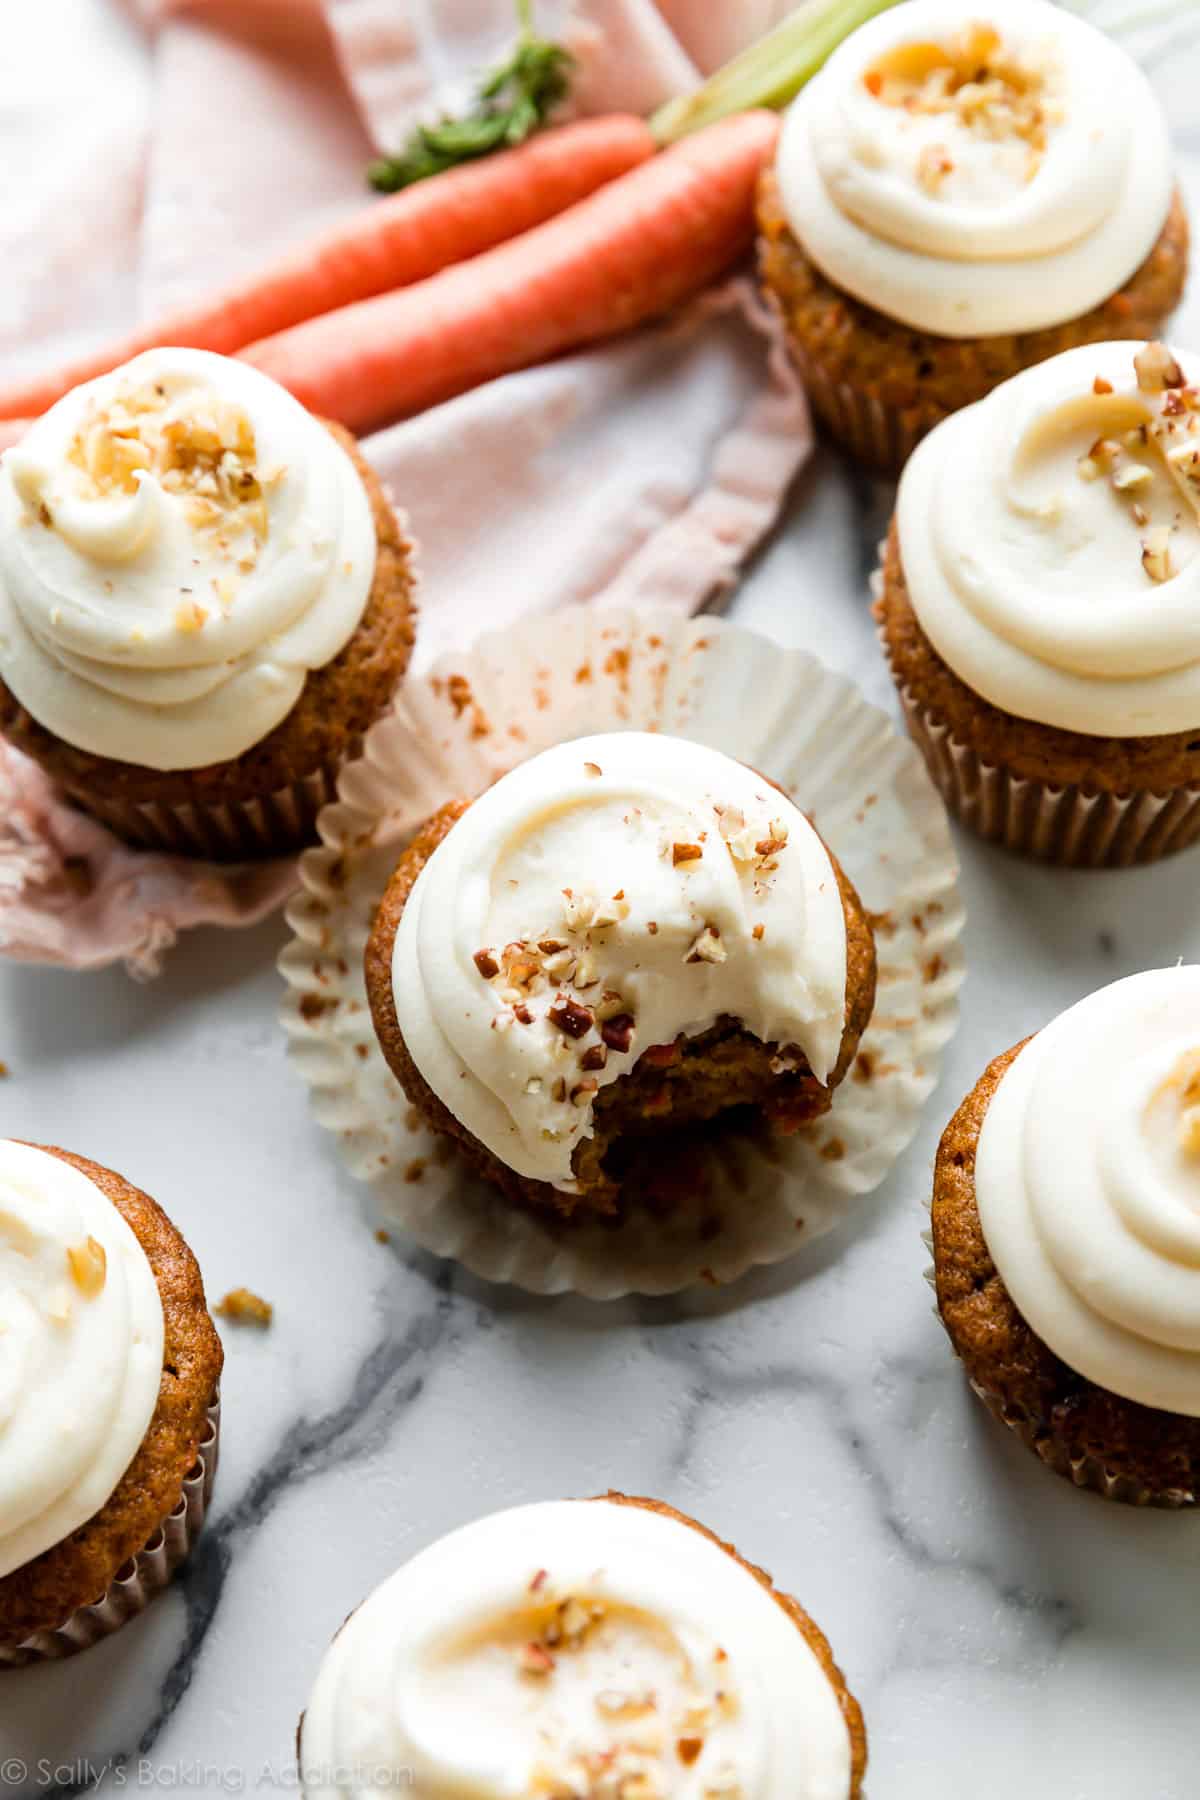 7 carrot cake cupcakes with cream cheese frosting and chopped walnuts on top=